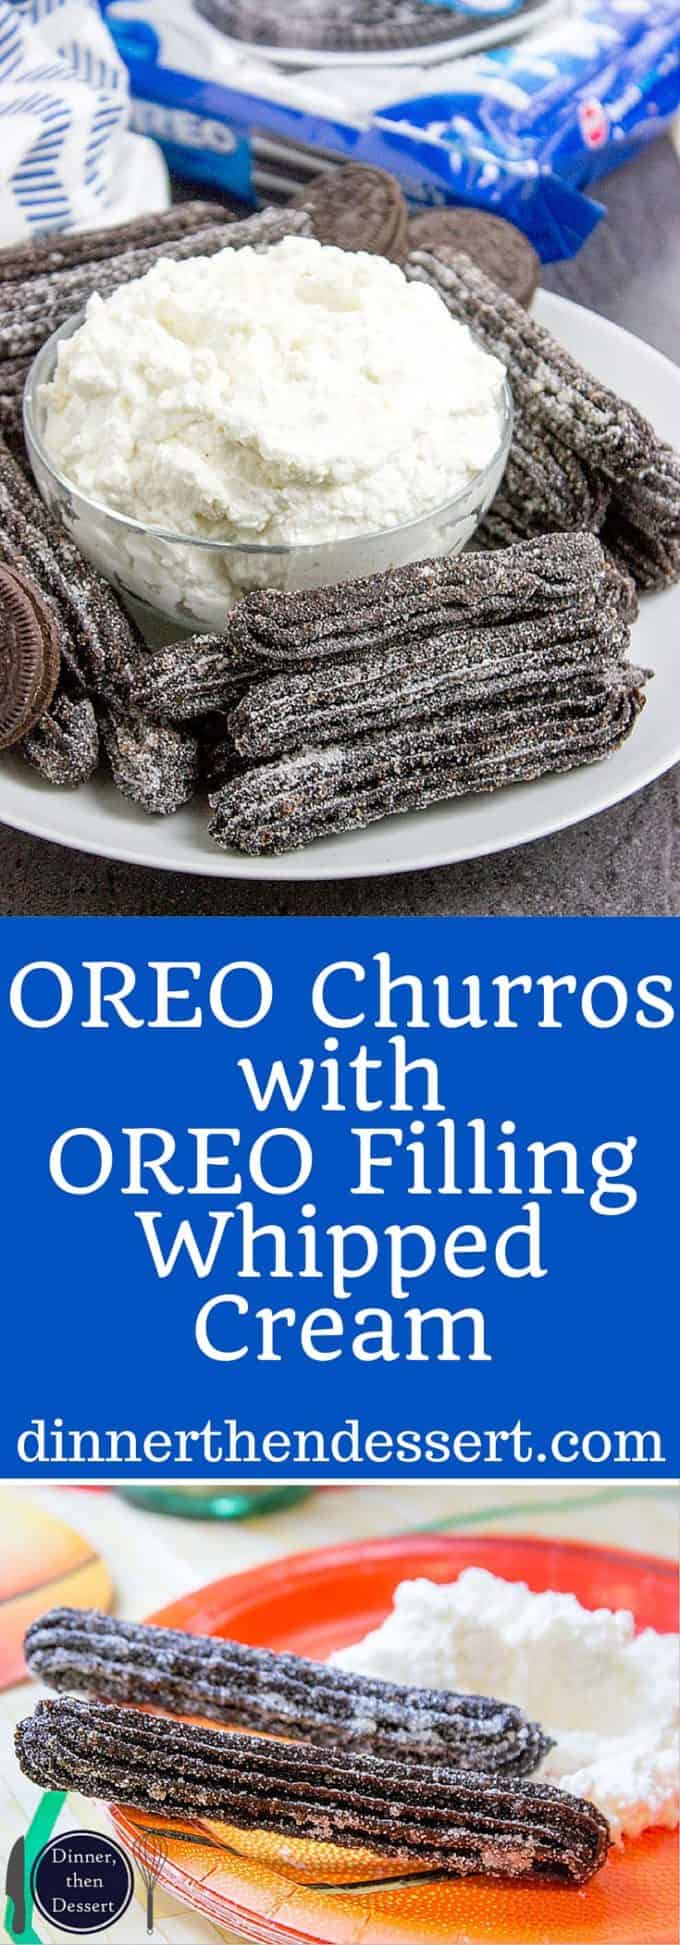 OREO Churros are crispy, tender, perfectly chocolate-y and perfectly paired with OREO filling whipped cream dip for dunking. AD. Now you can have the viral recipe made easy. #GreatTasteTourney